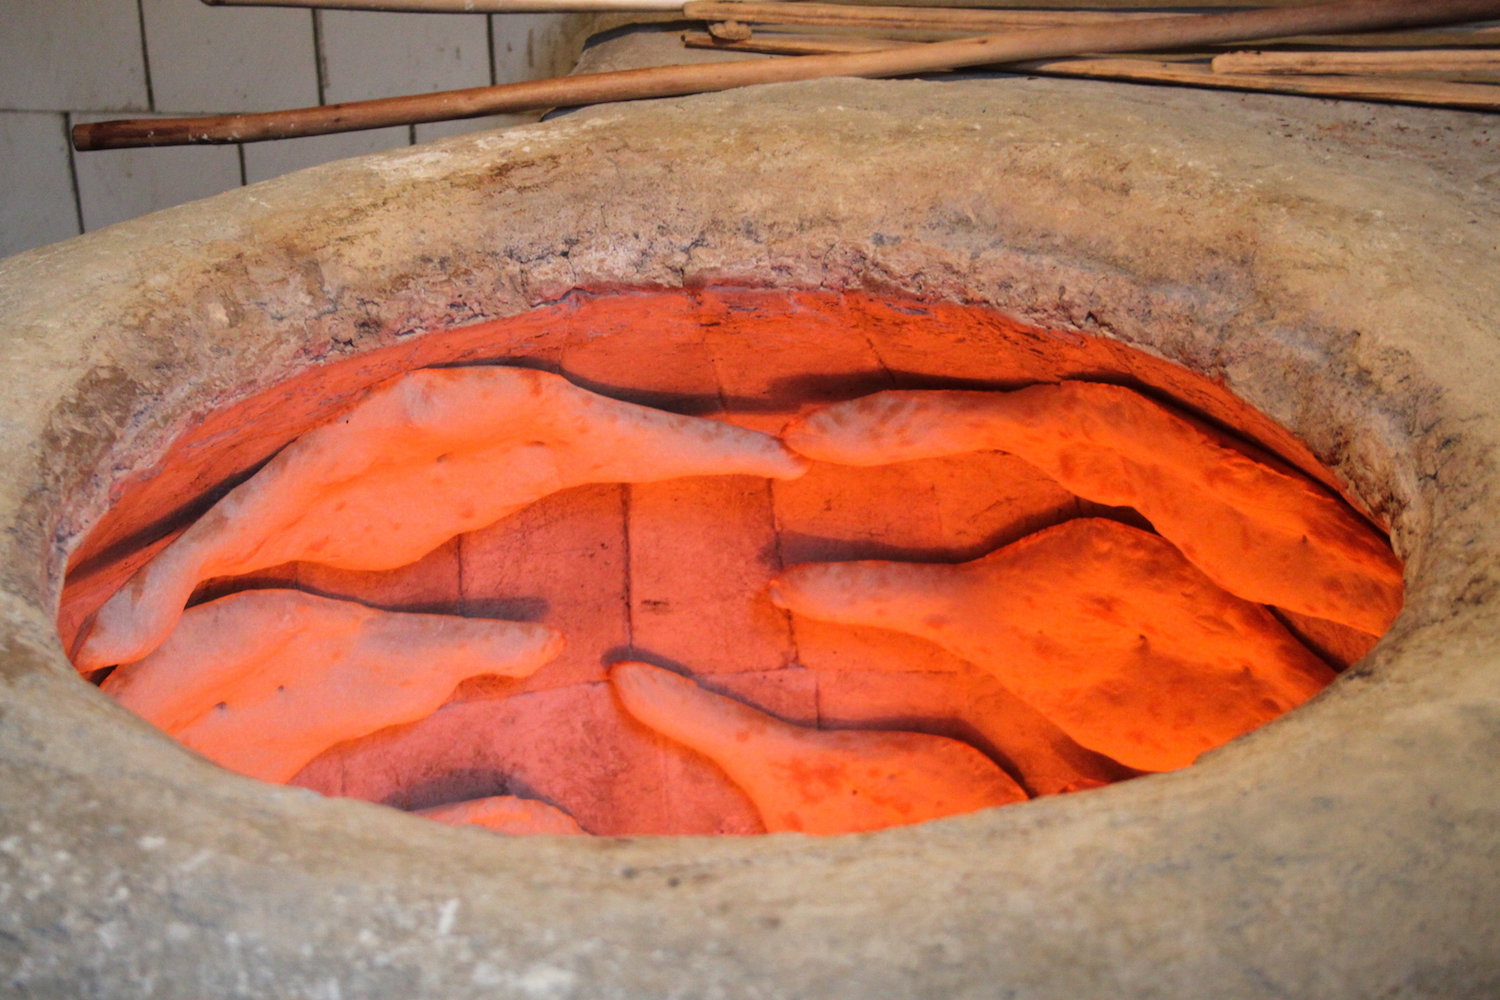 Bread baking in a tone oven (Eat Me. Drink Me.)